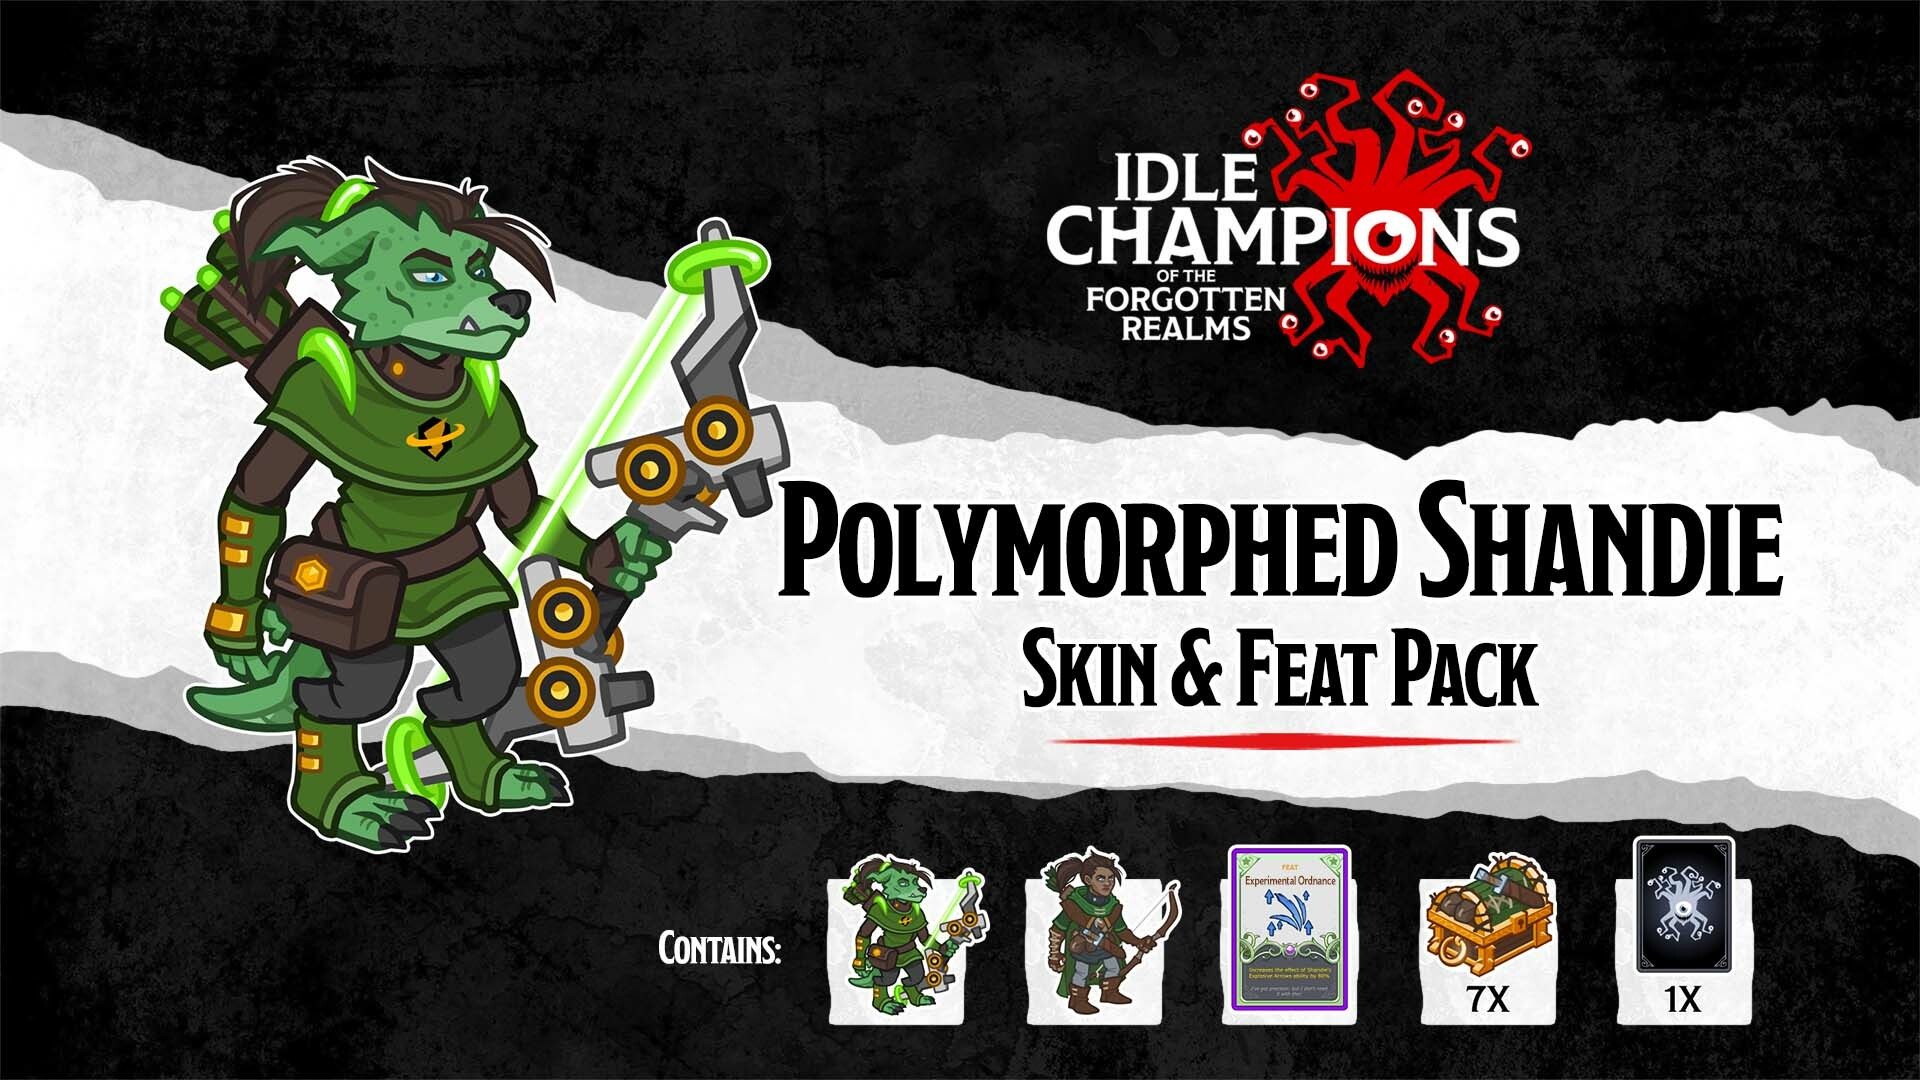 Idle Champions - Polymorphed Shandie Skin & Feat Pack DLC Steam CD Key 1.02 usd